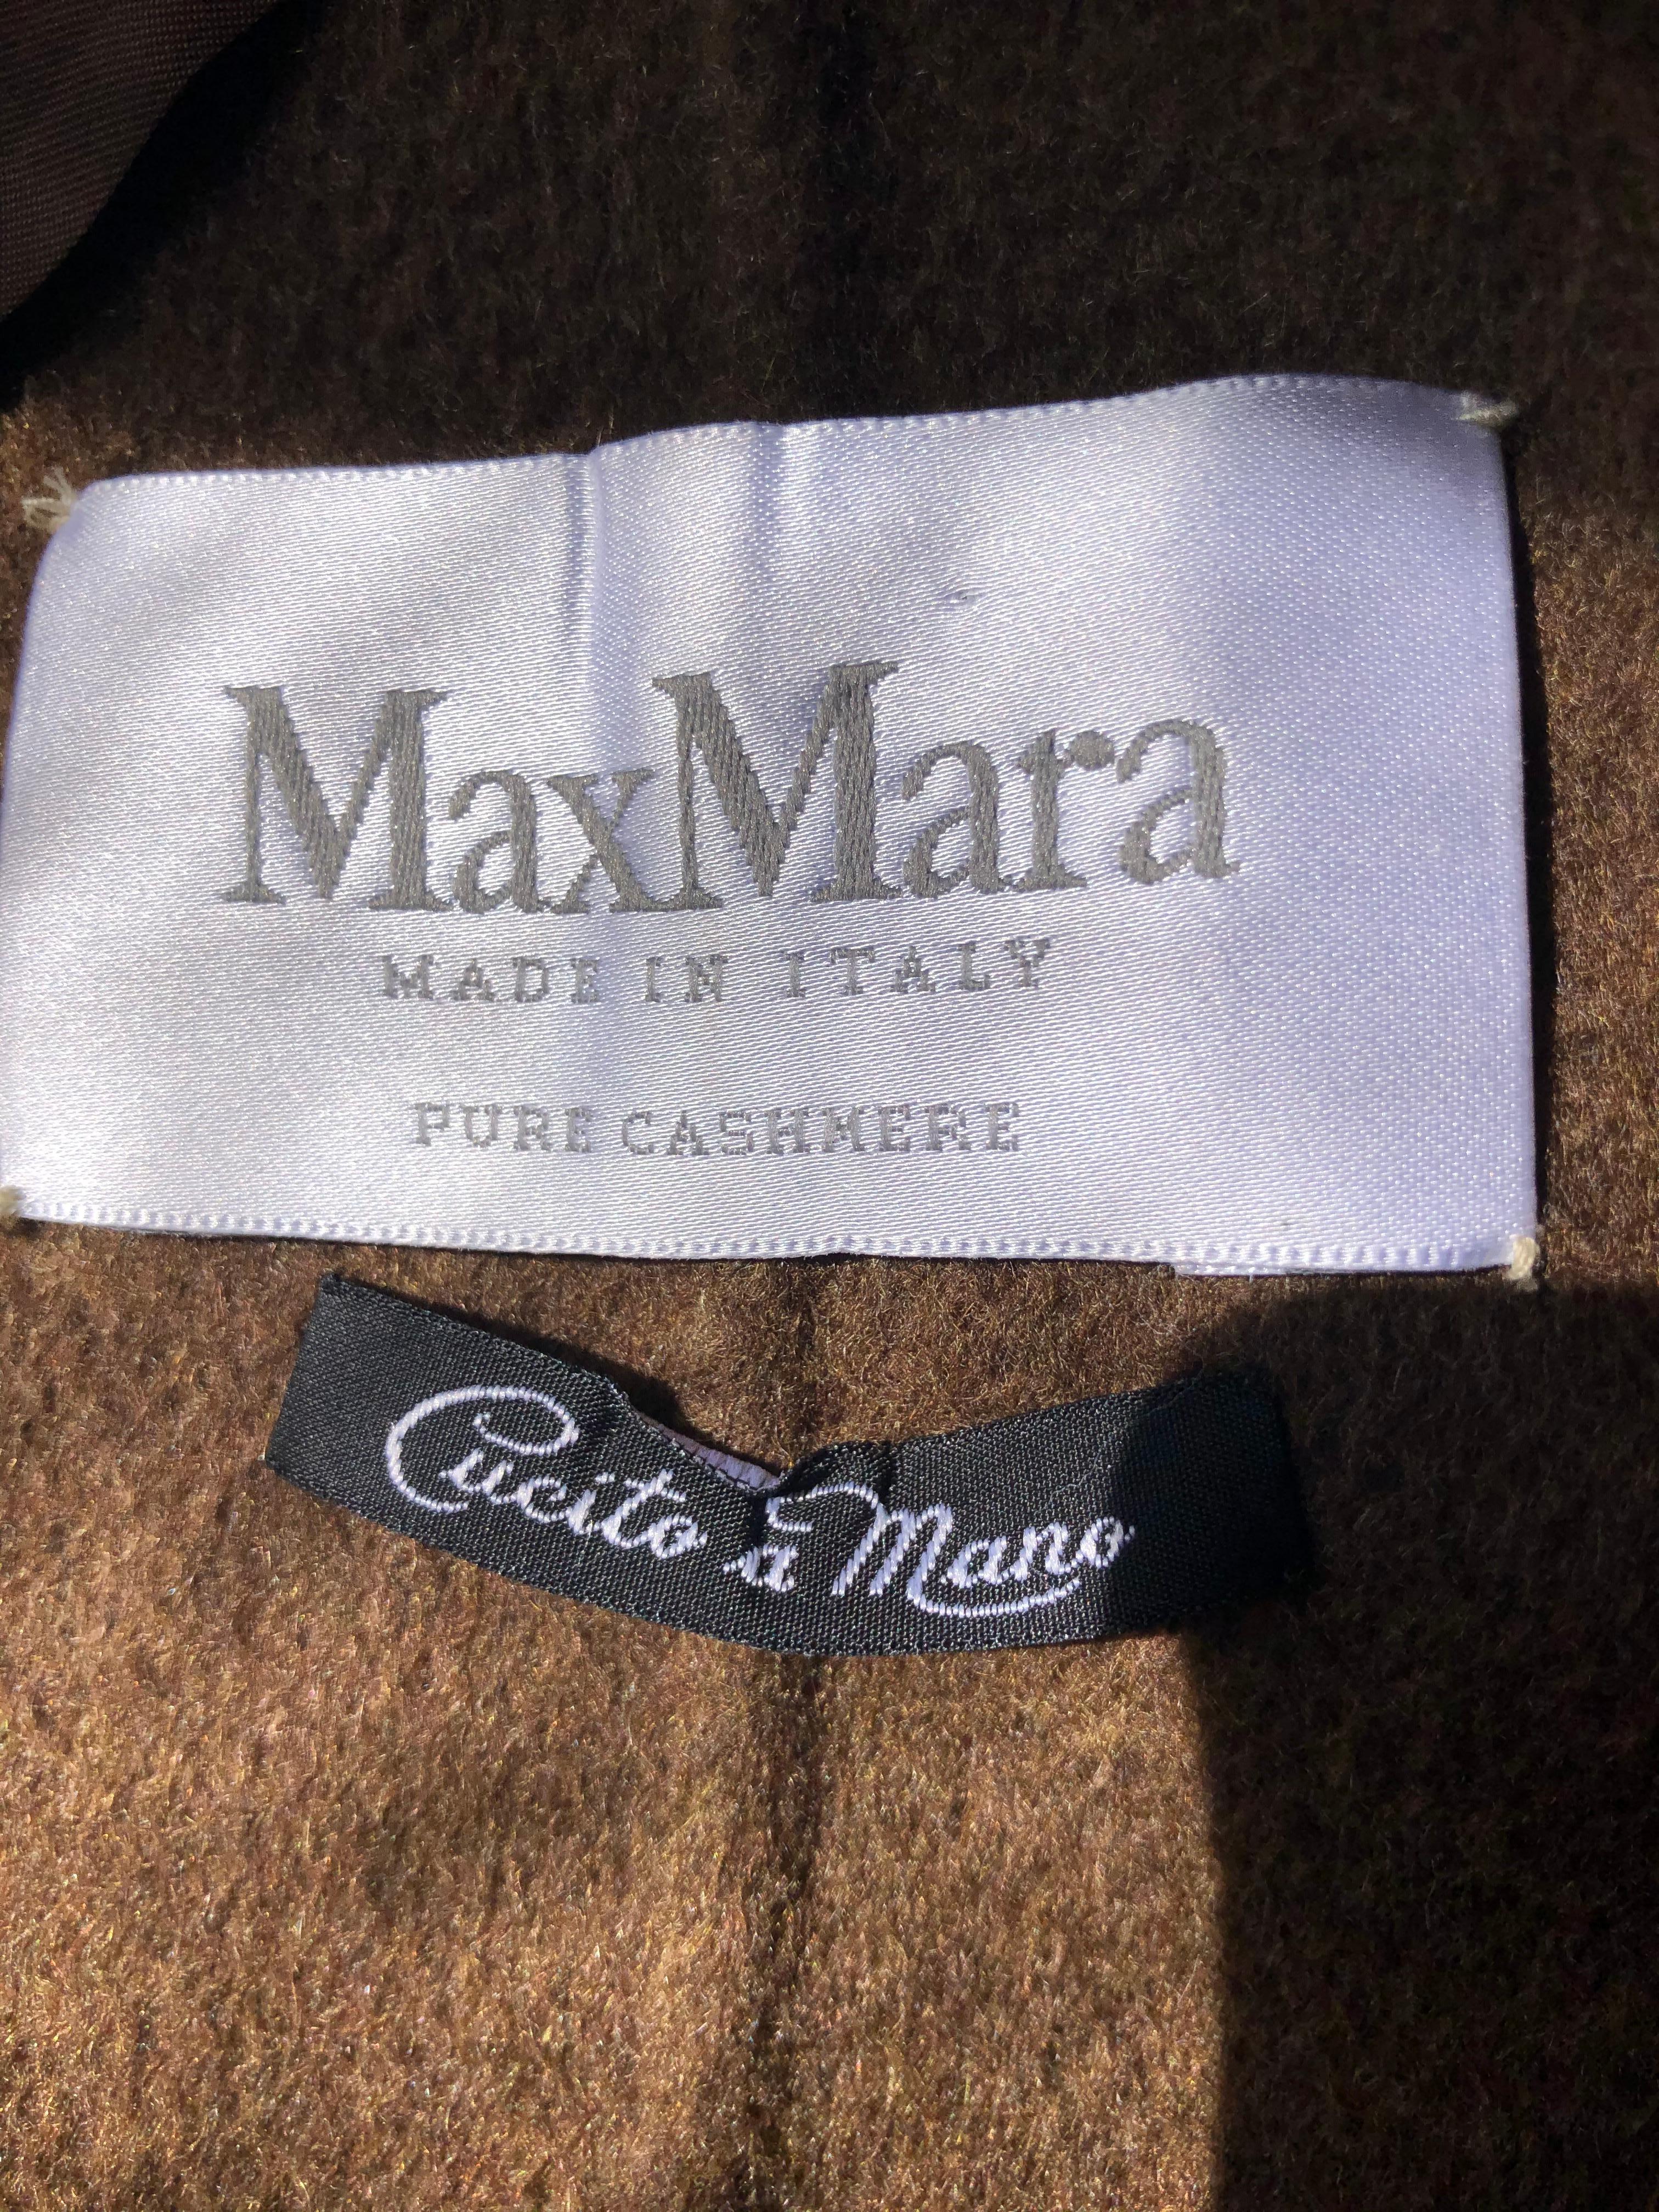 Max Mara quality at its best ! This 100% cashmere coat is hand made with stitching around the pockets and collar. It is in immaculate condition and has never been worn. The label says size 4 but it wears bigger as it is a 40 bust and 39